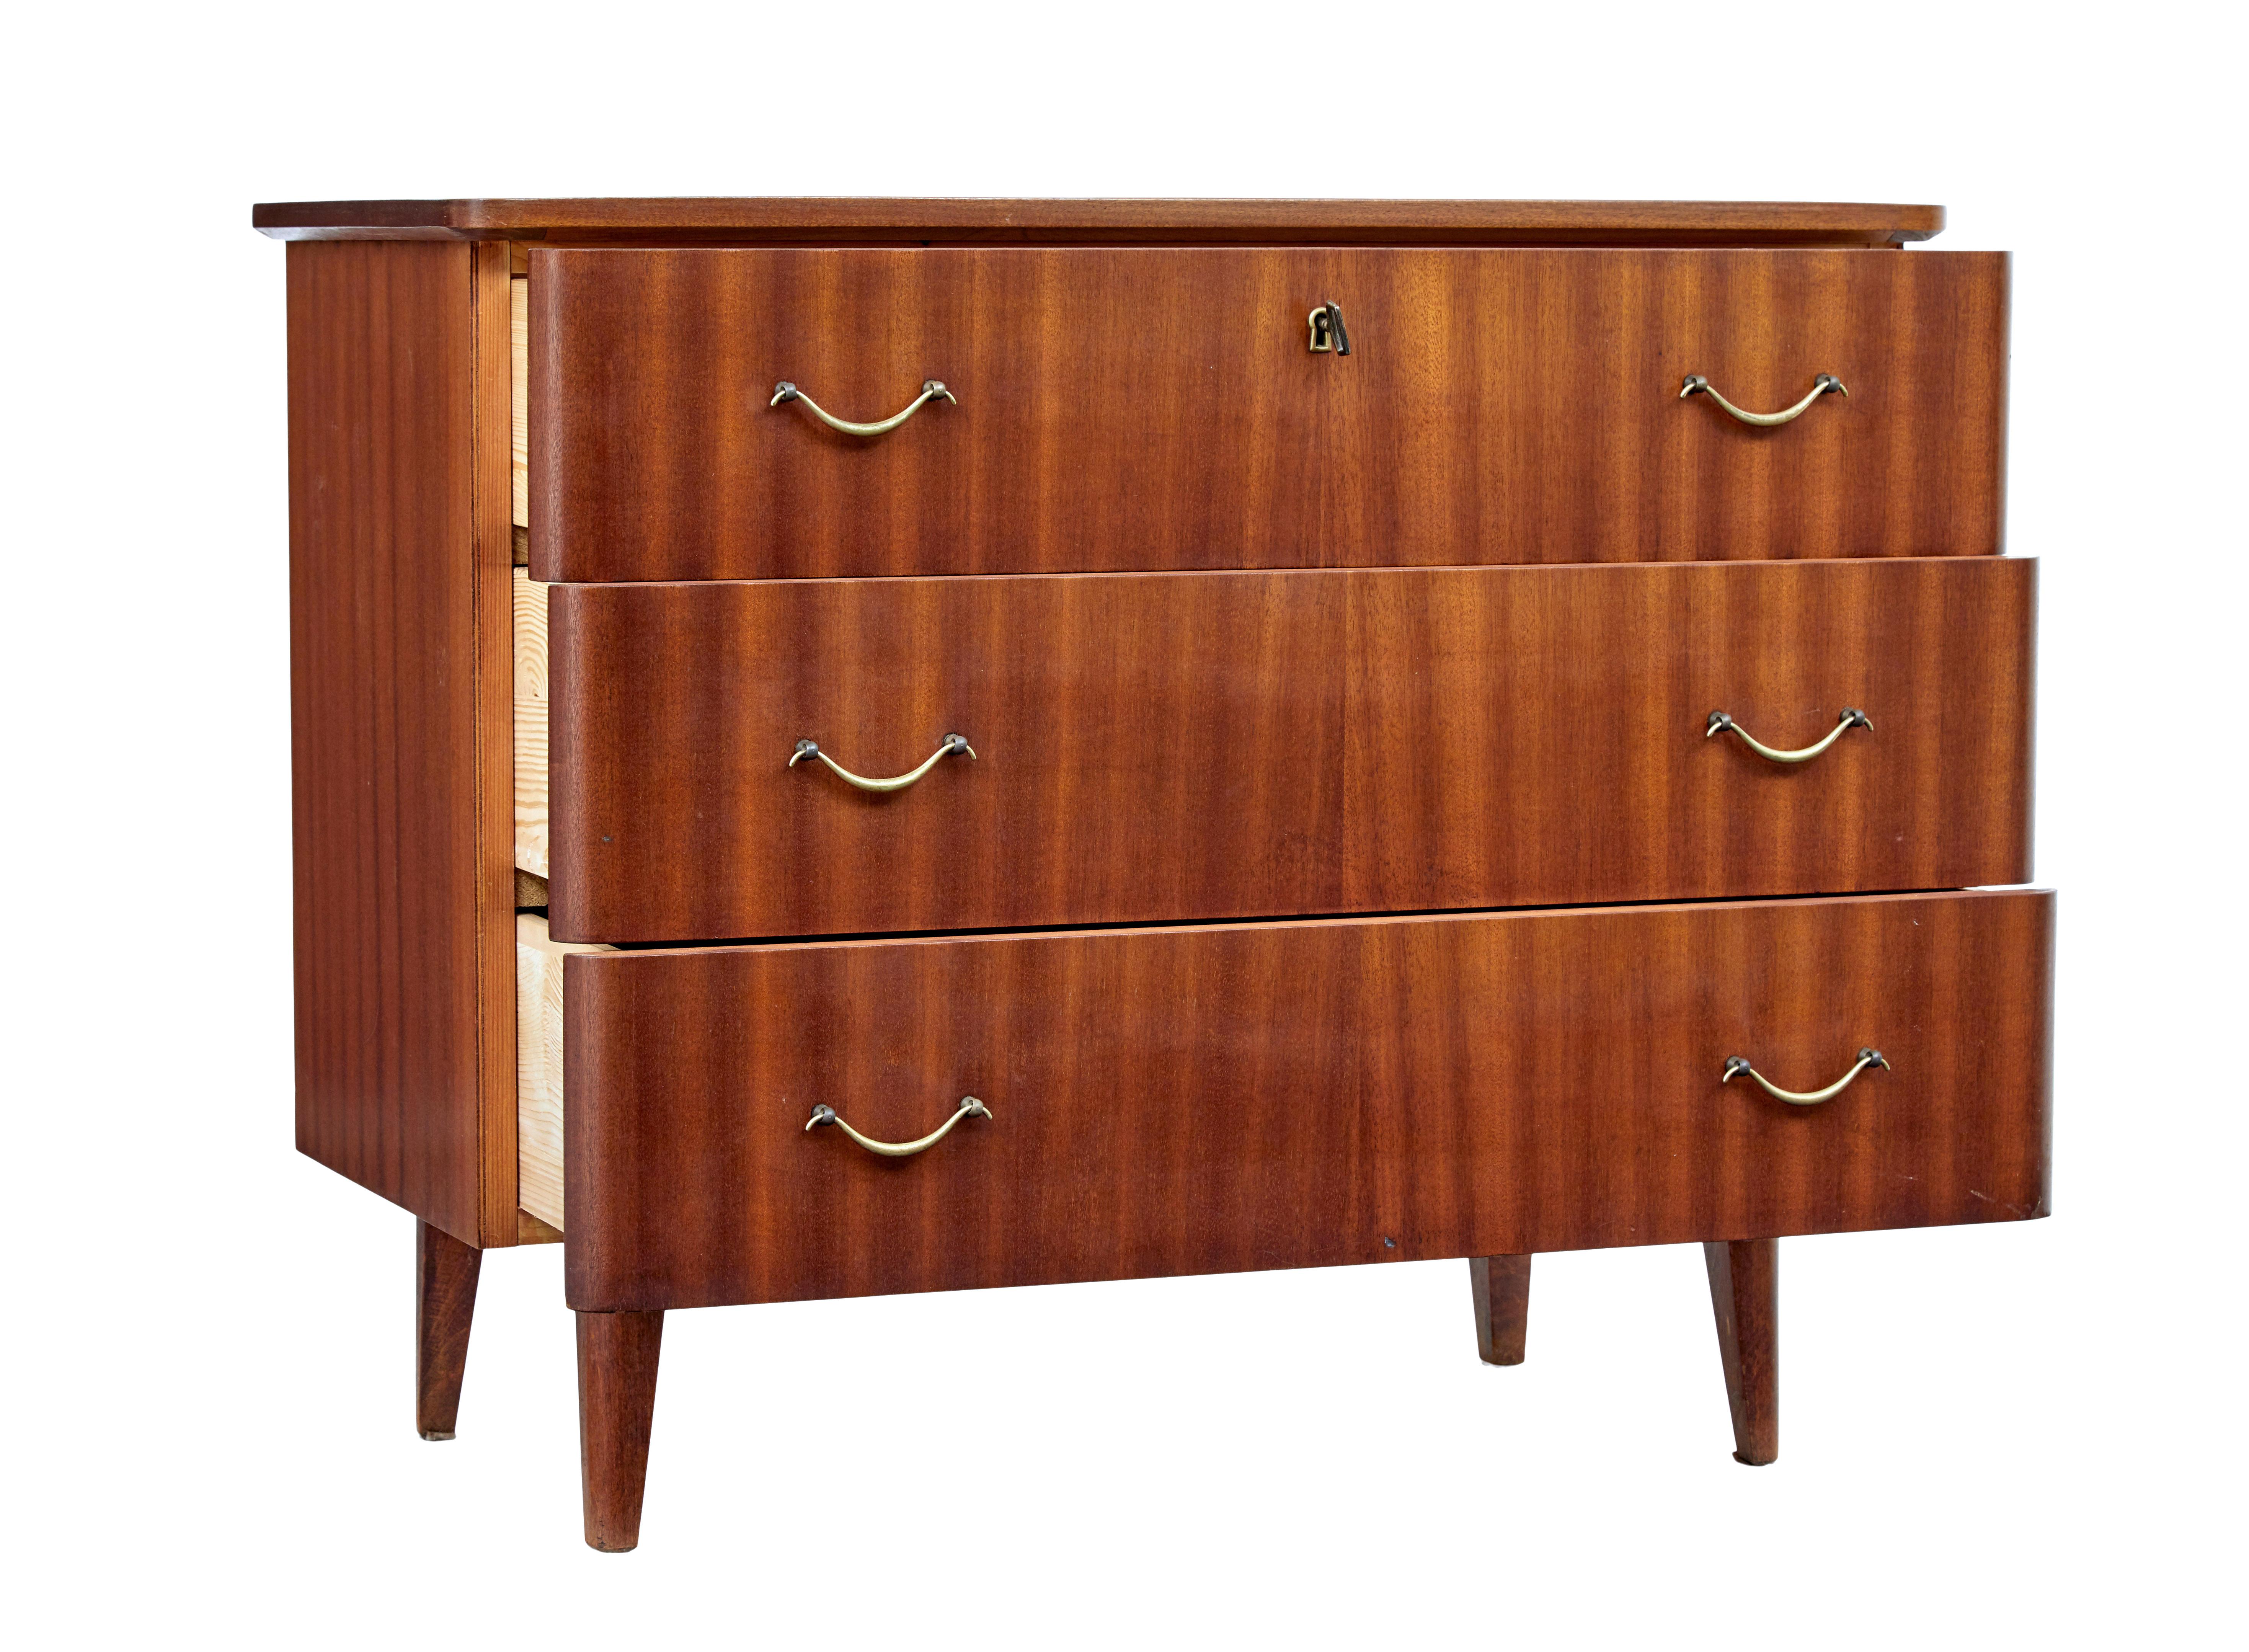 Mid-20th Century Danish teak chest of drawers circa 1960.

3 drawer Scandinavian design chest of drawers from the 1960s. Veneered in teak and fitted with shaped brass handles.  Top drawer with working lock and key for secure storage.  Standing on